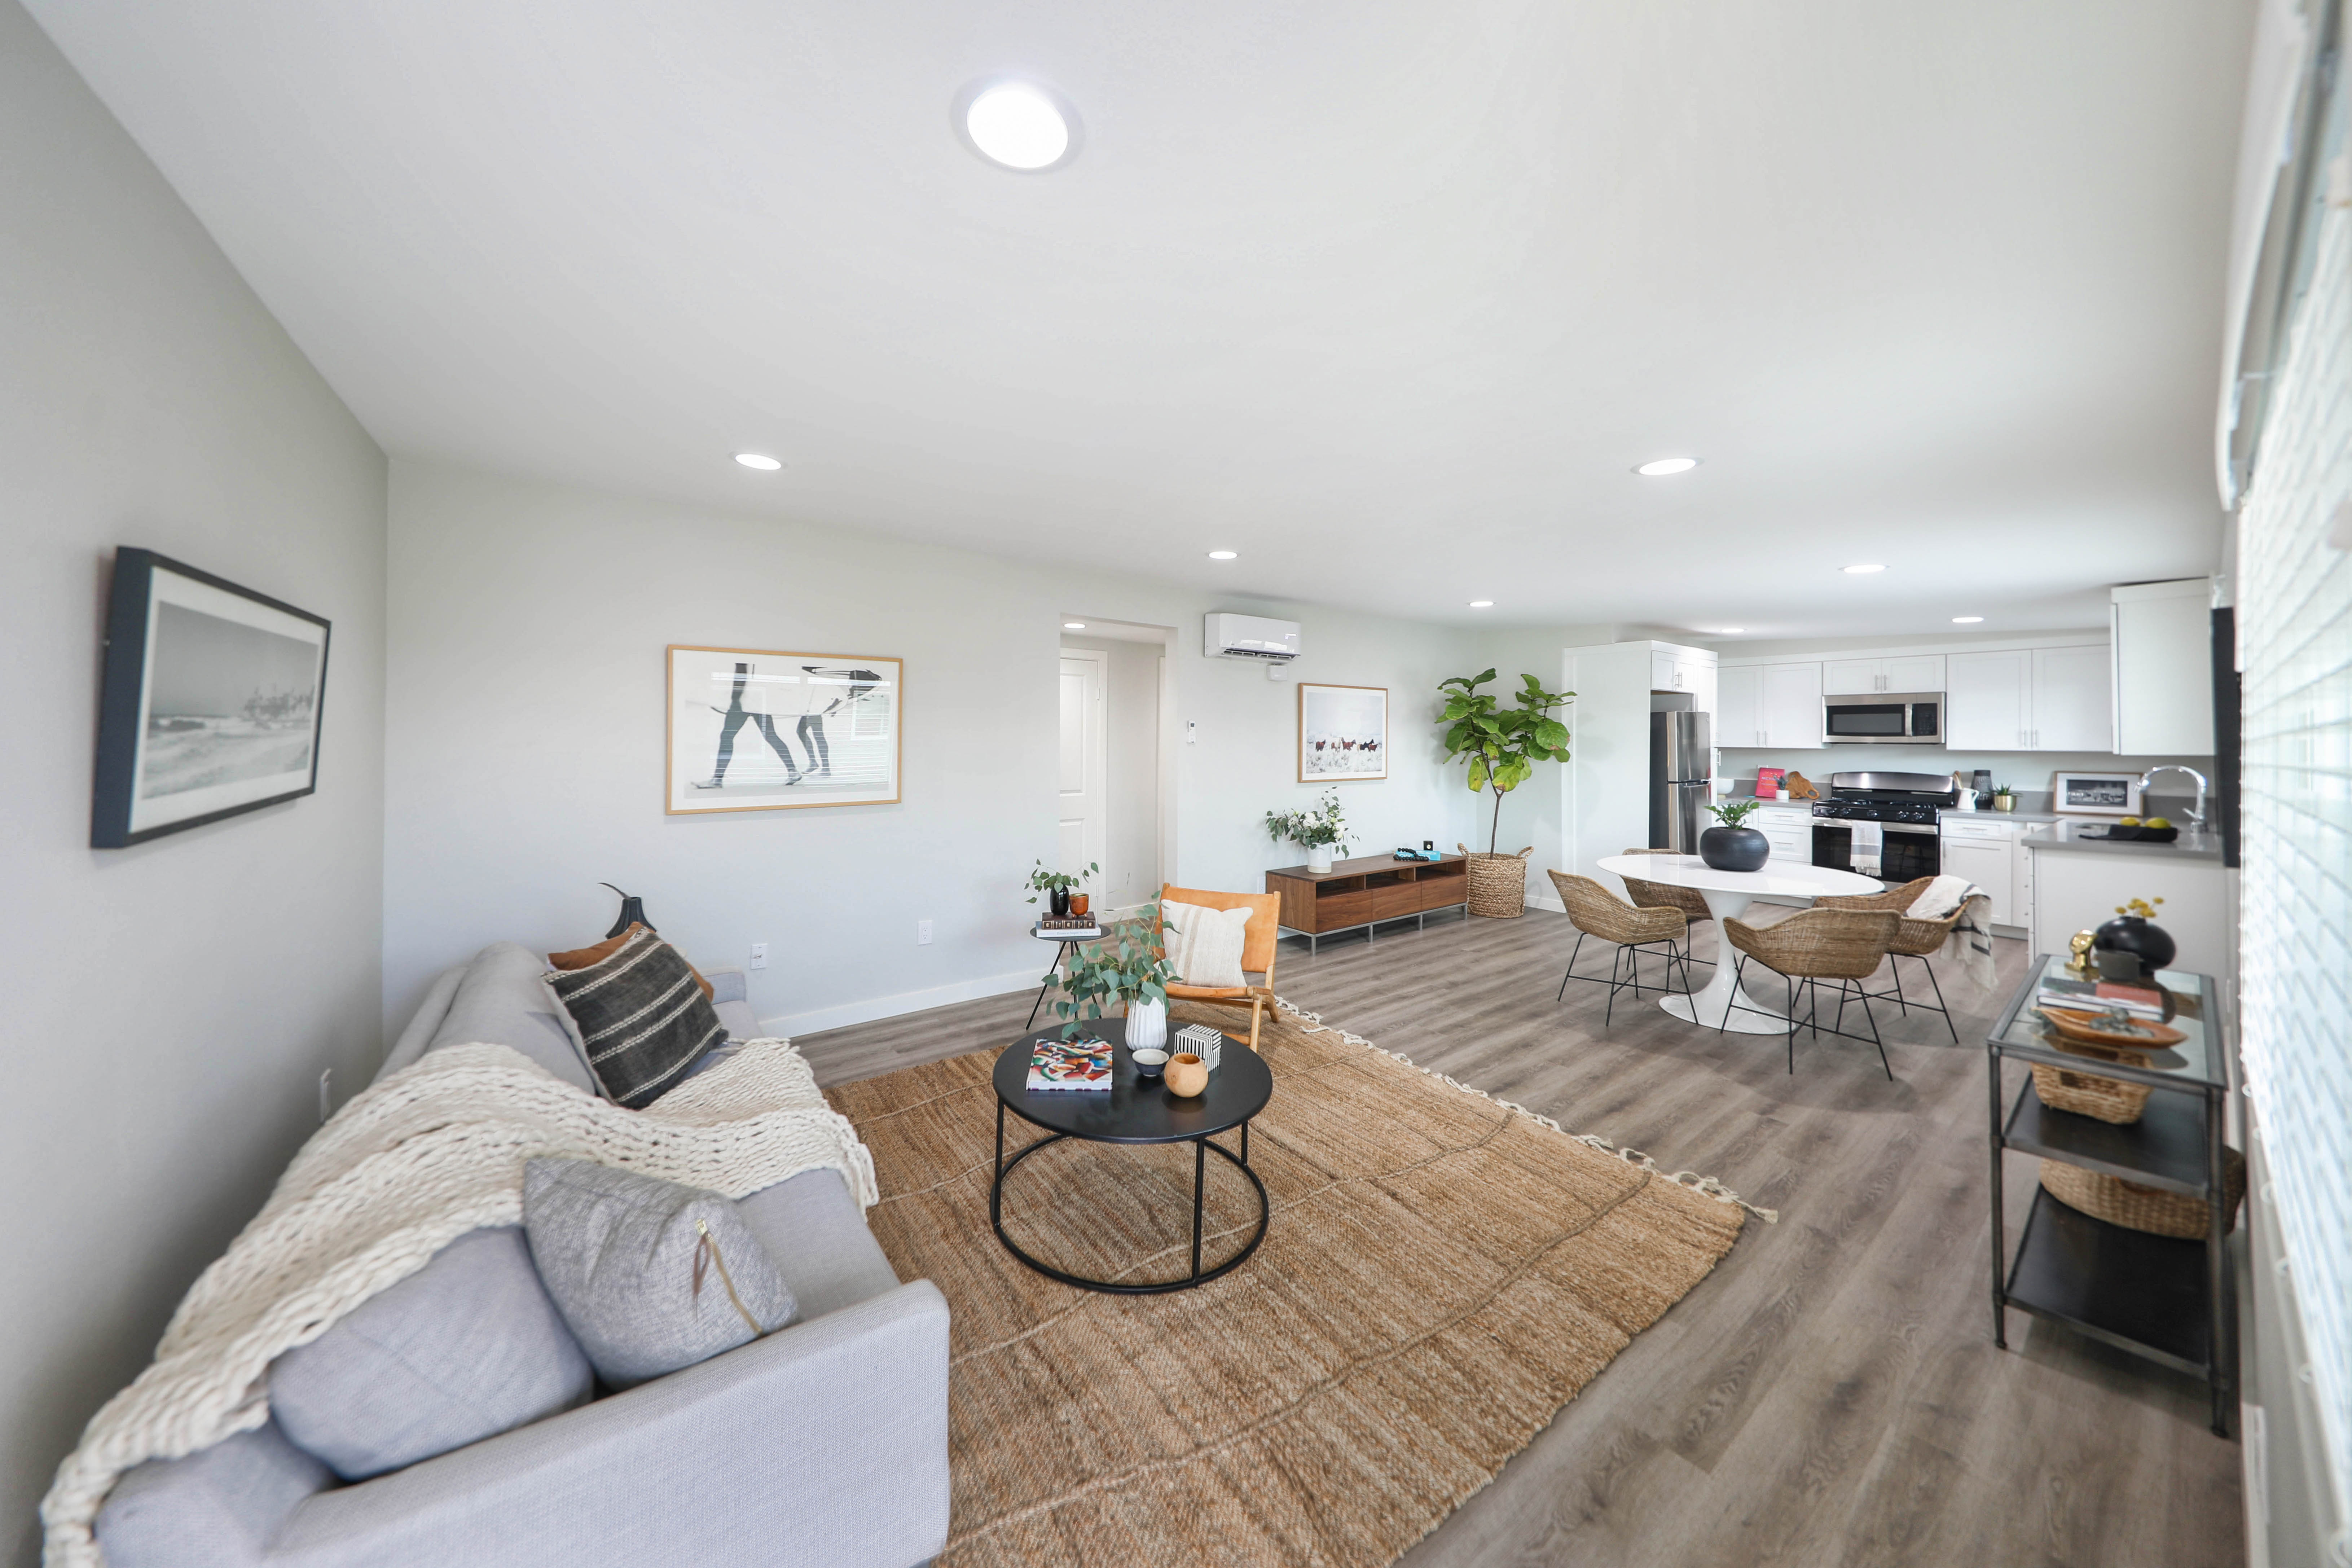 A furnished living room in a modern home at Pacific West Villas in Westminster, California